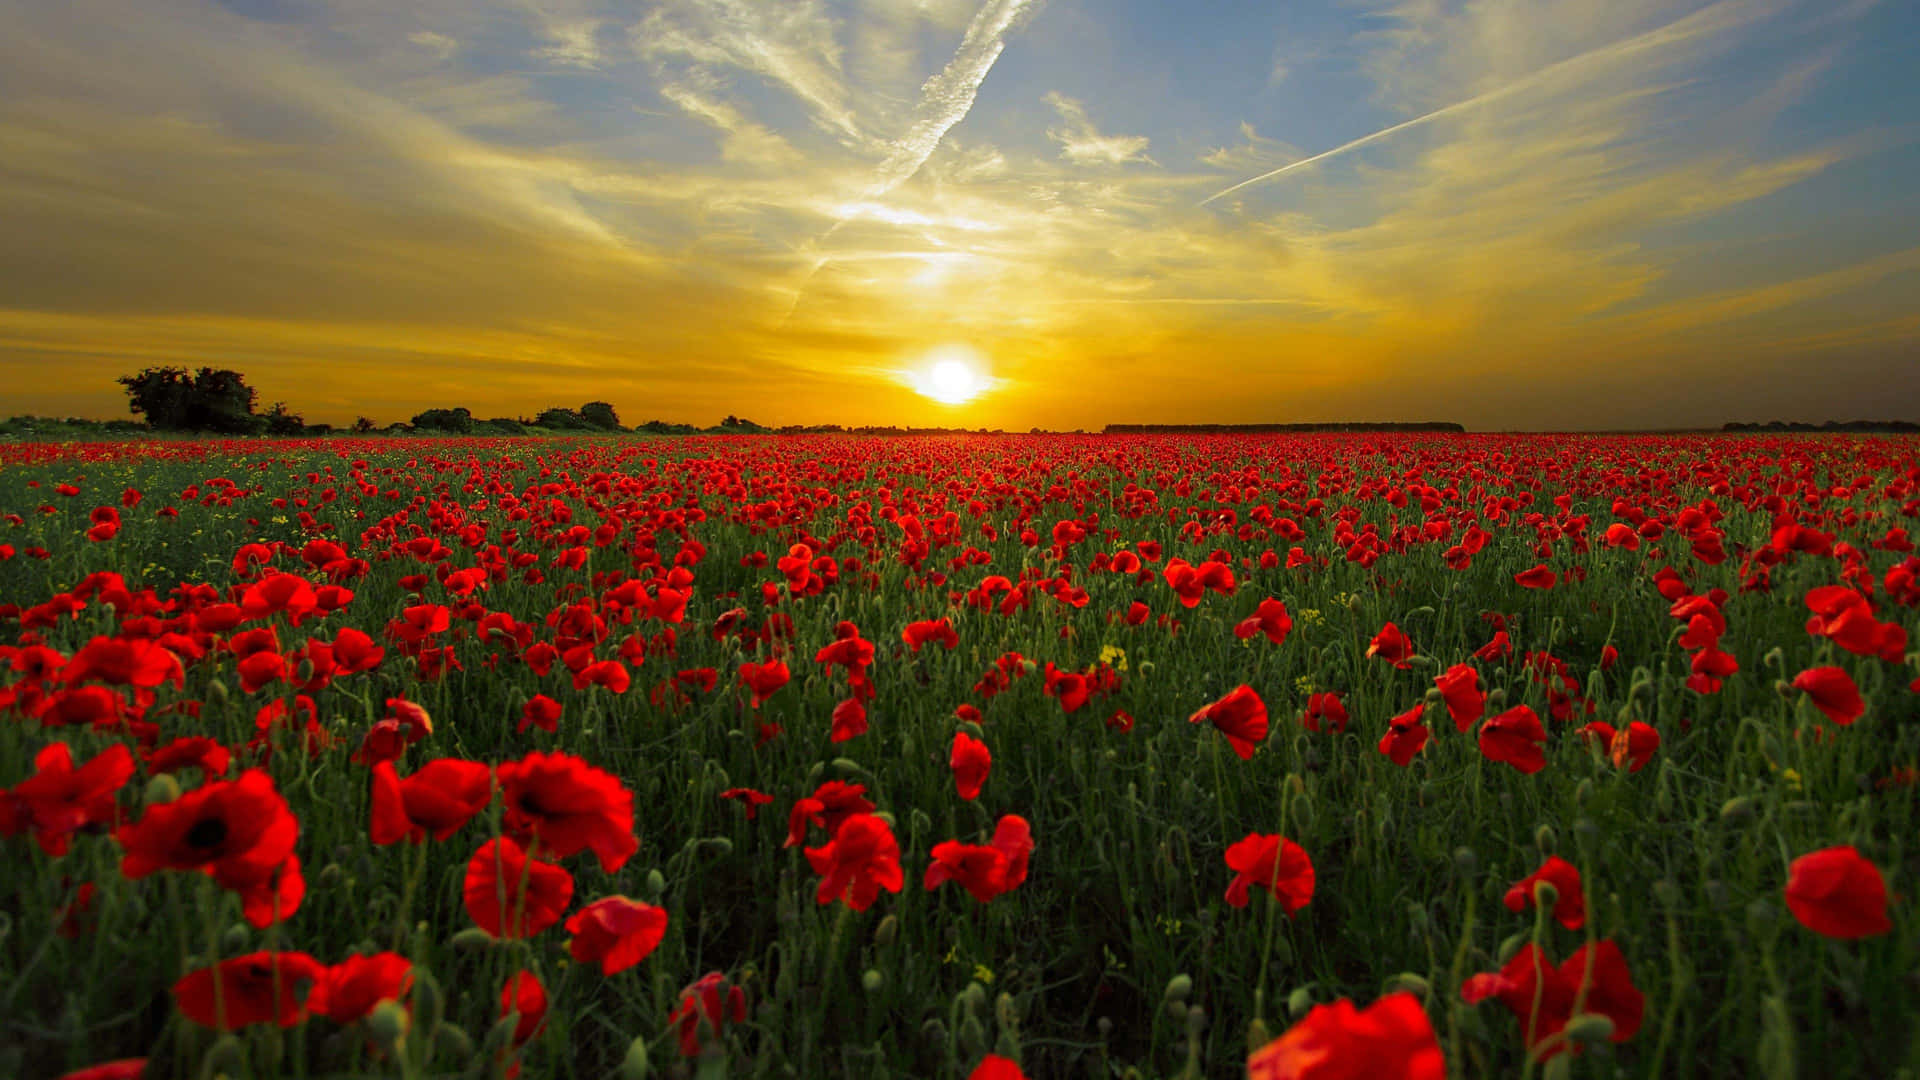 A Field Of Red Poppies